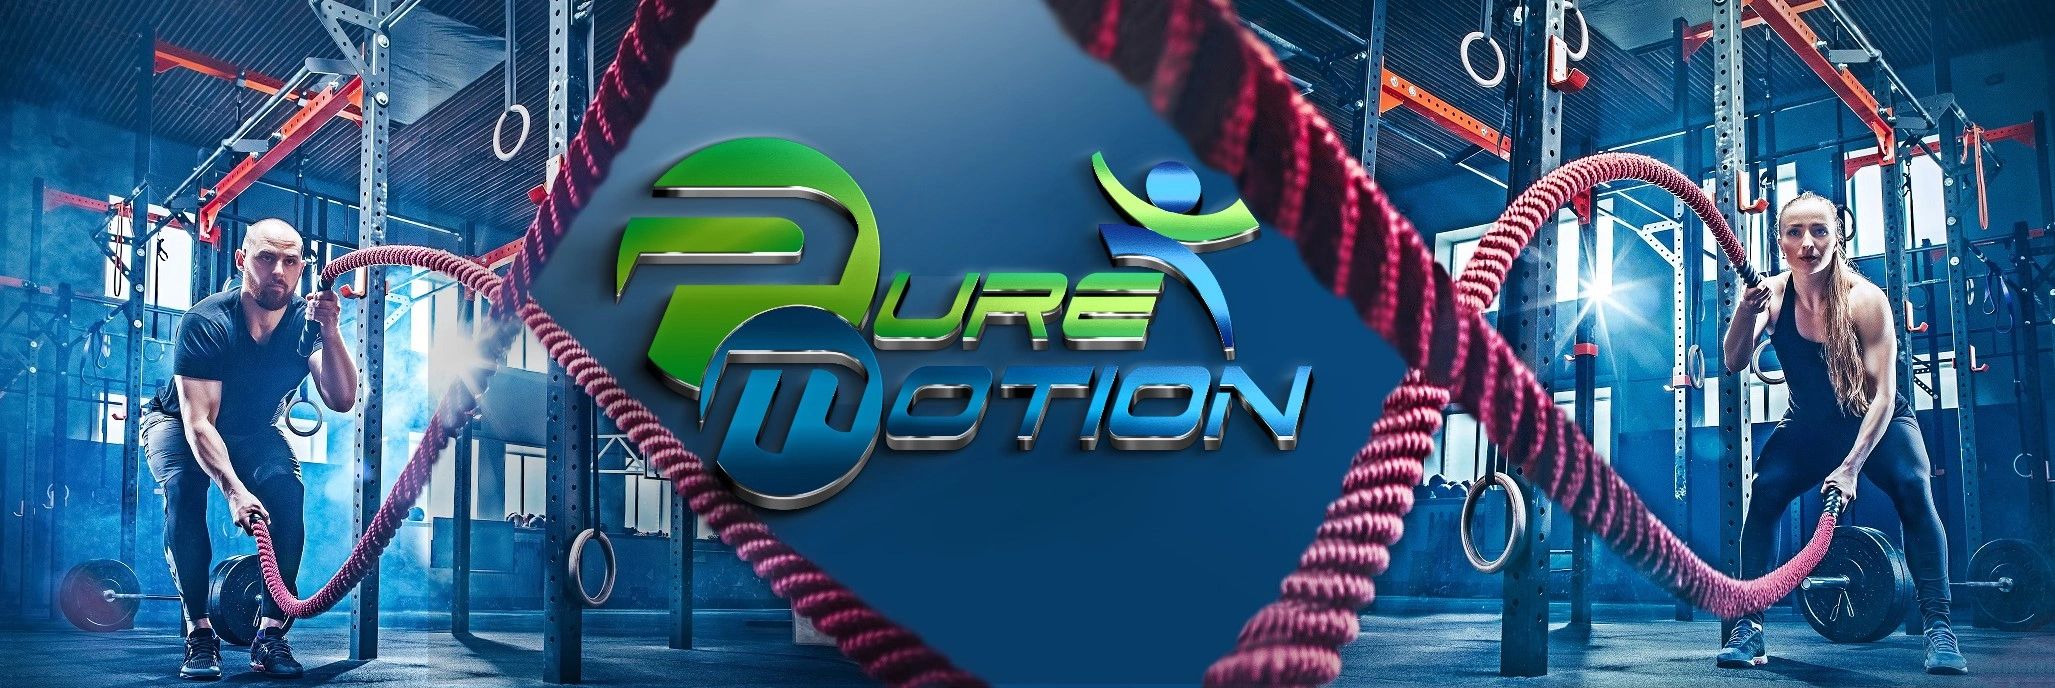 Pure Motion Fitness